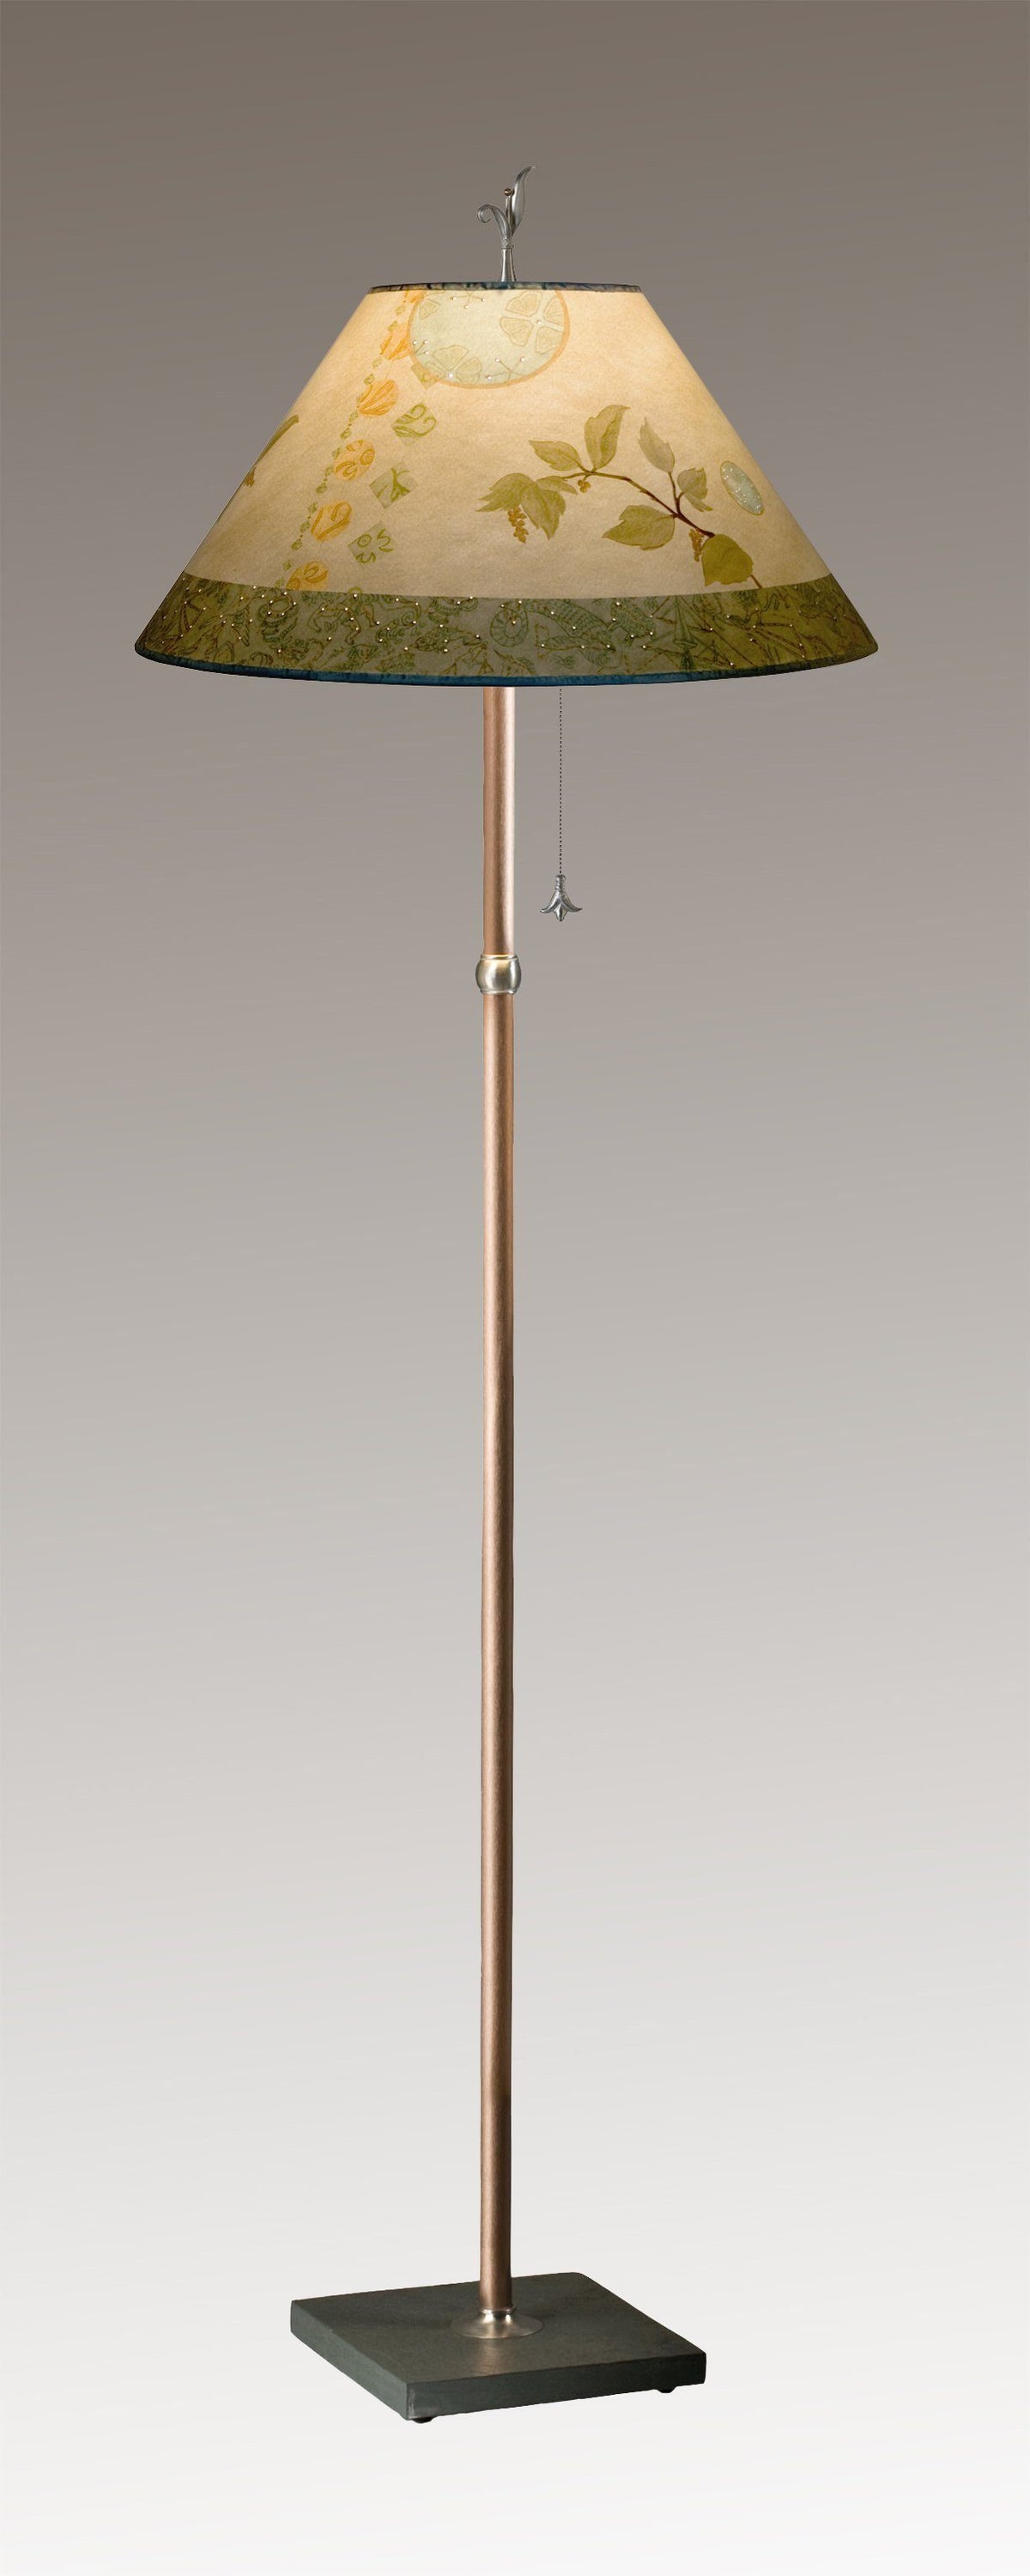 Copper Floor Lamp with Large Conical Shade in Celestial Leaf